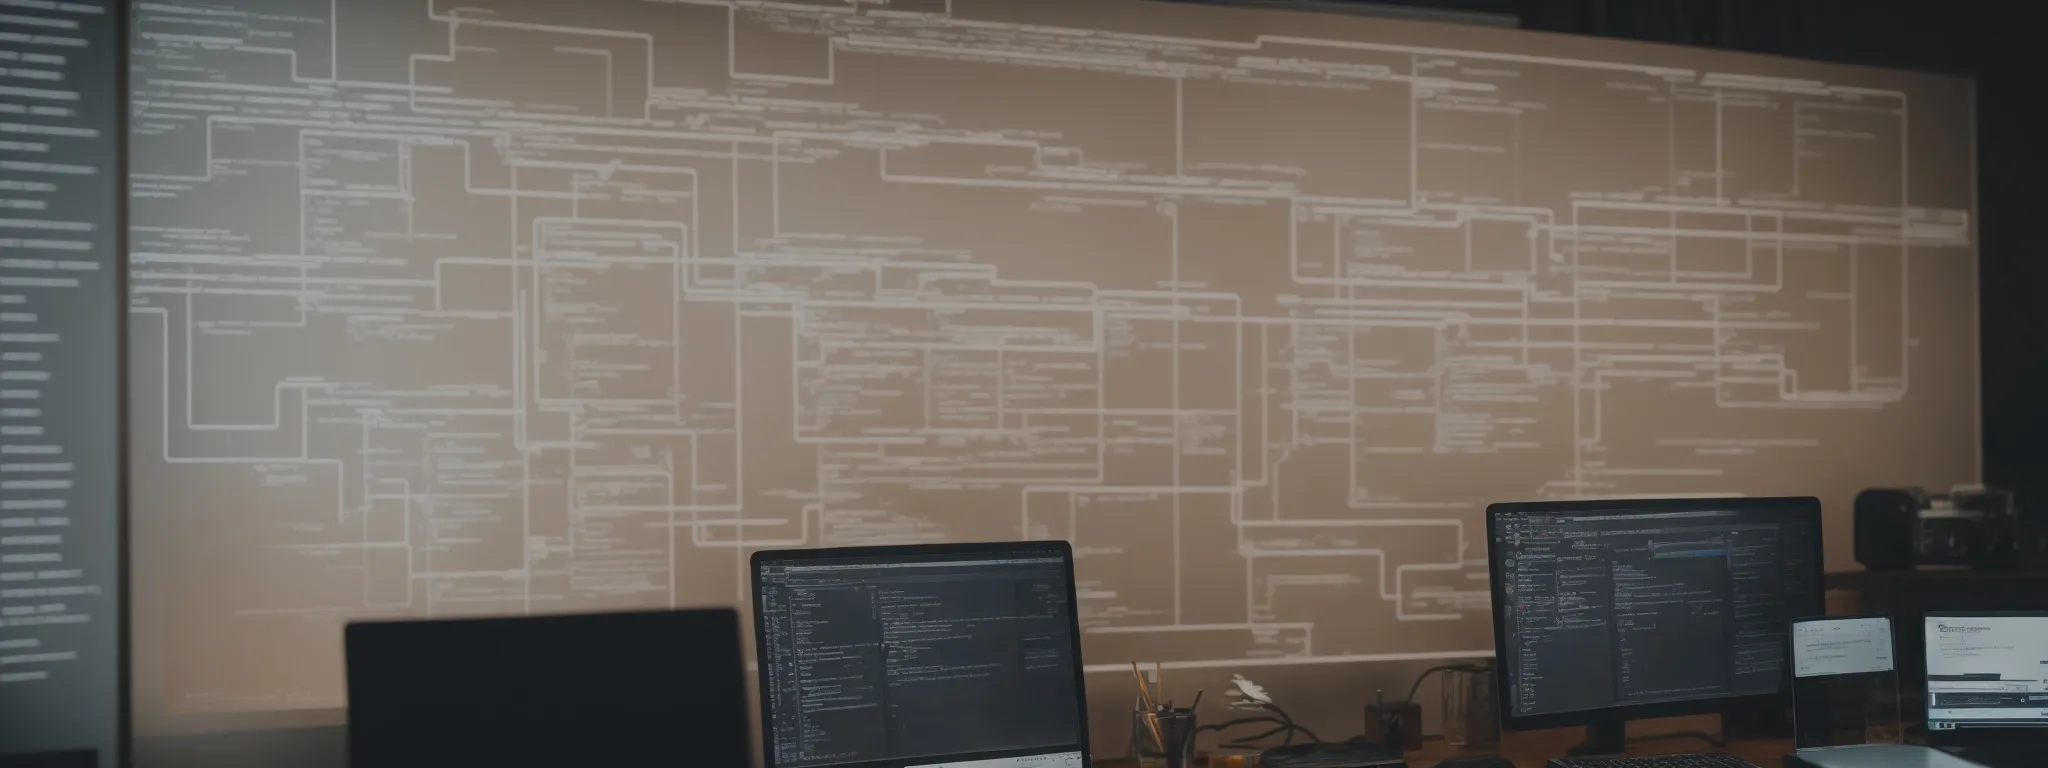 a web developer examines a flowchart of a website's structure on a computer screen.